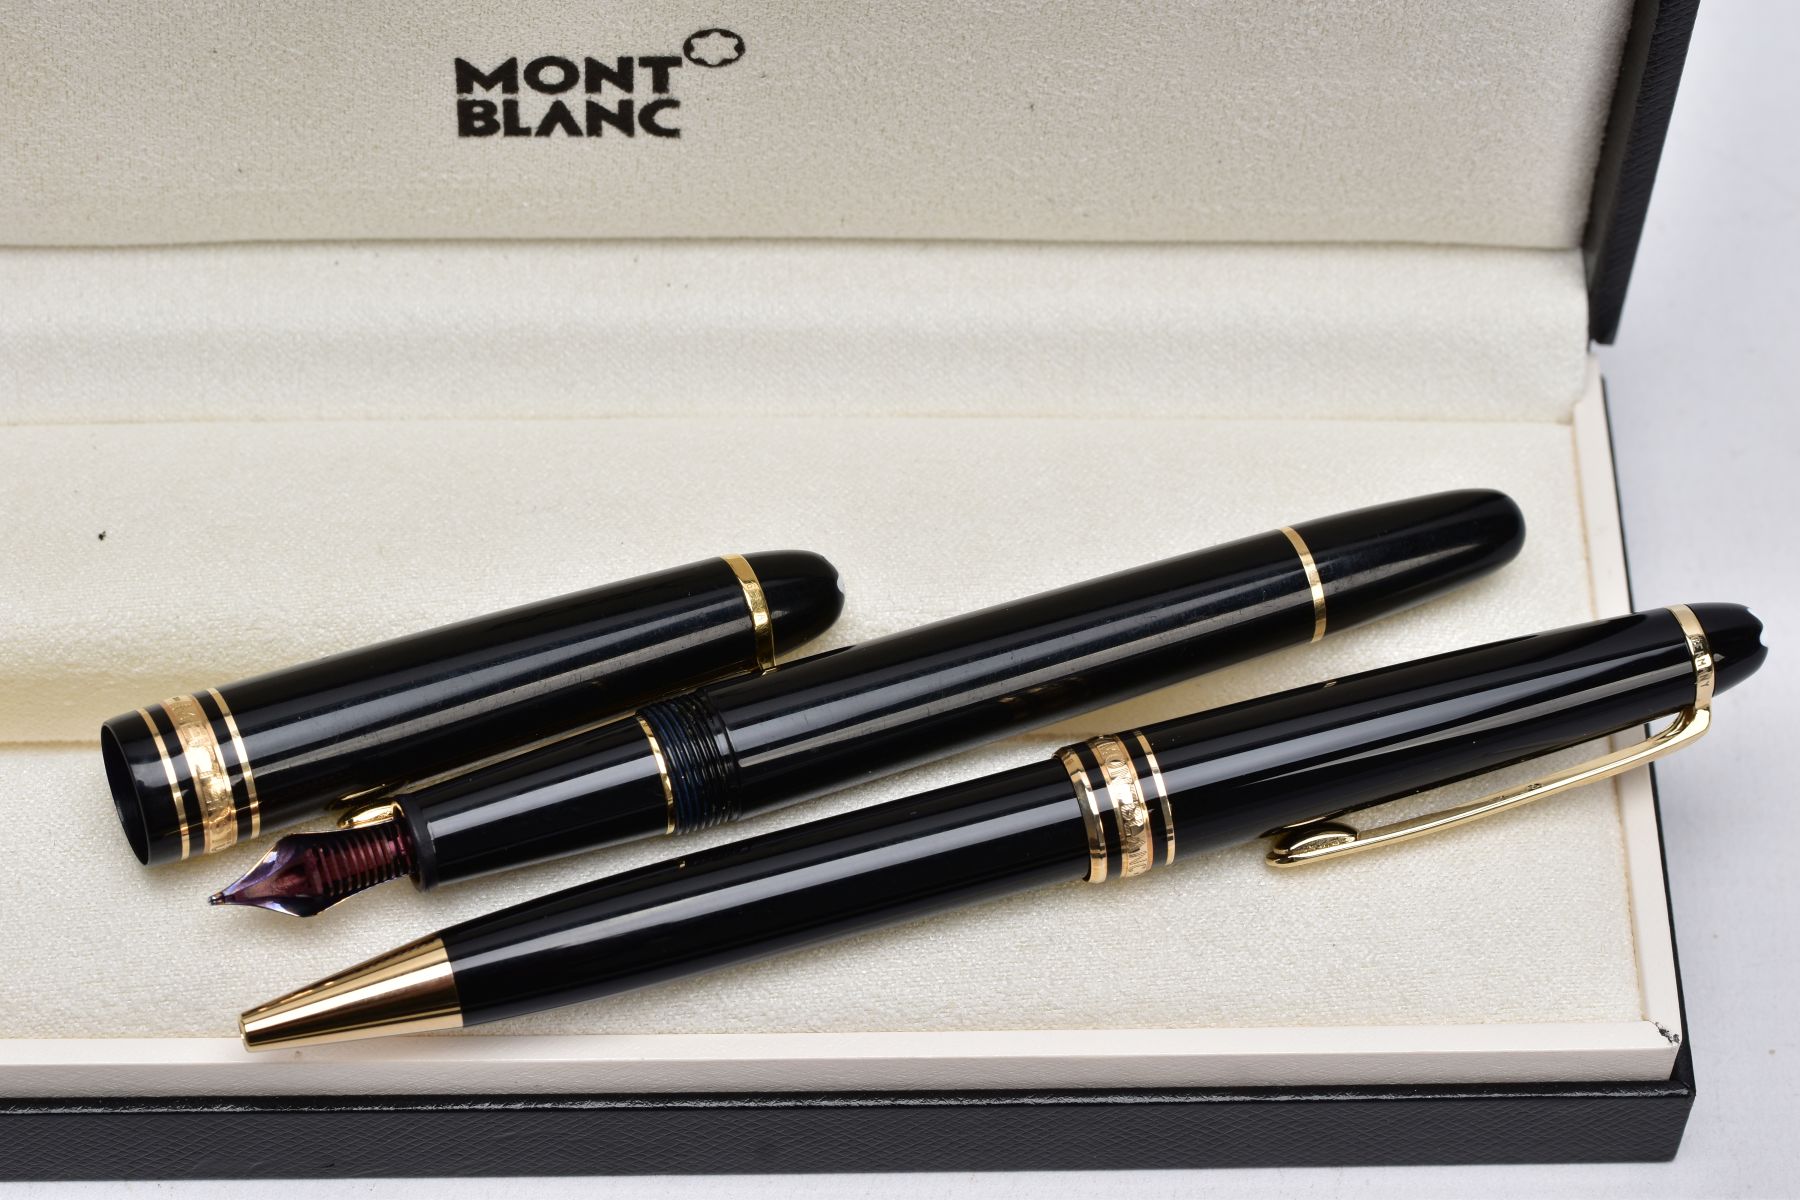 A CASED 'MONT BLANC-MEISTERSTUCK' FOUNTAIN PEN AND BALL POINT PEN, black lacquer with gold - Image 5 of 5